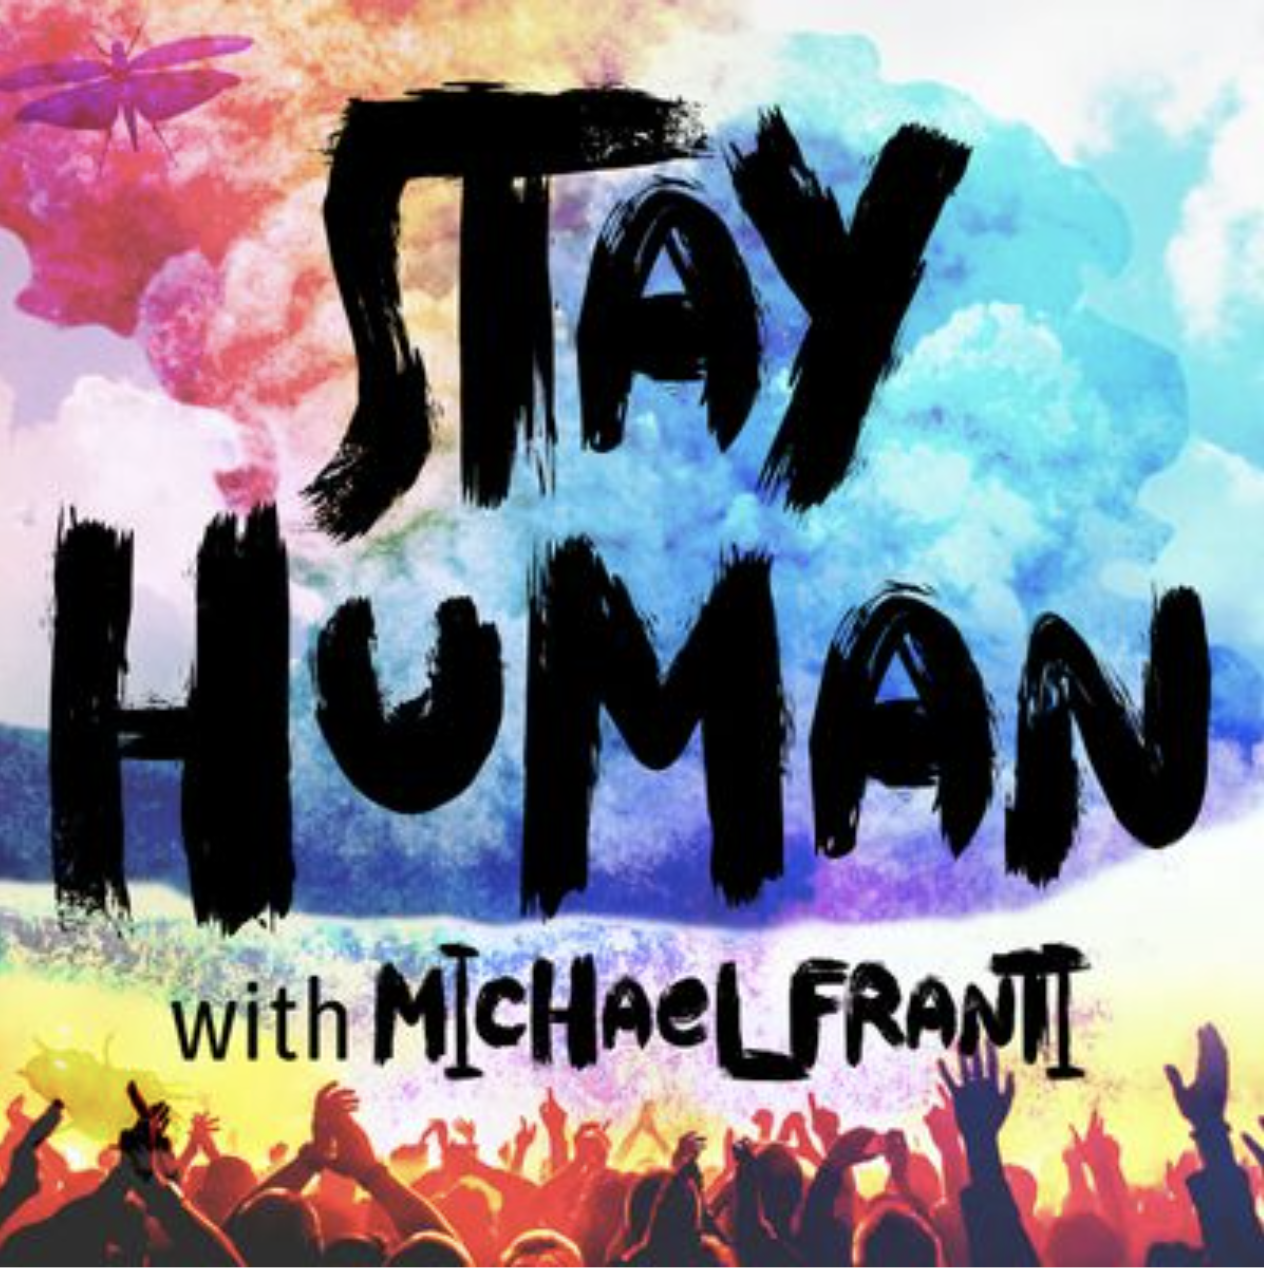 ASPN & Michael Franti’s ‘Stay Human’ Podcast Join Forces to Spread Positivity